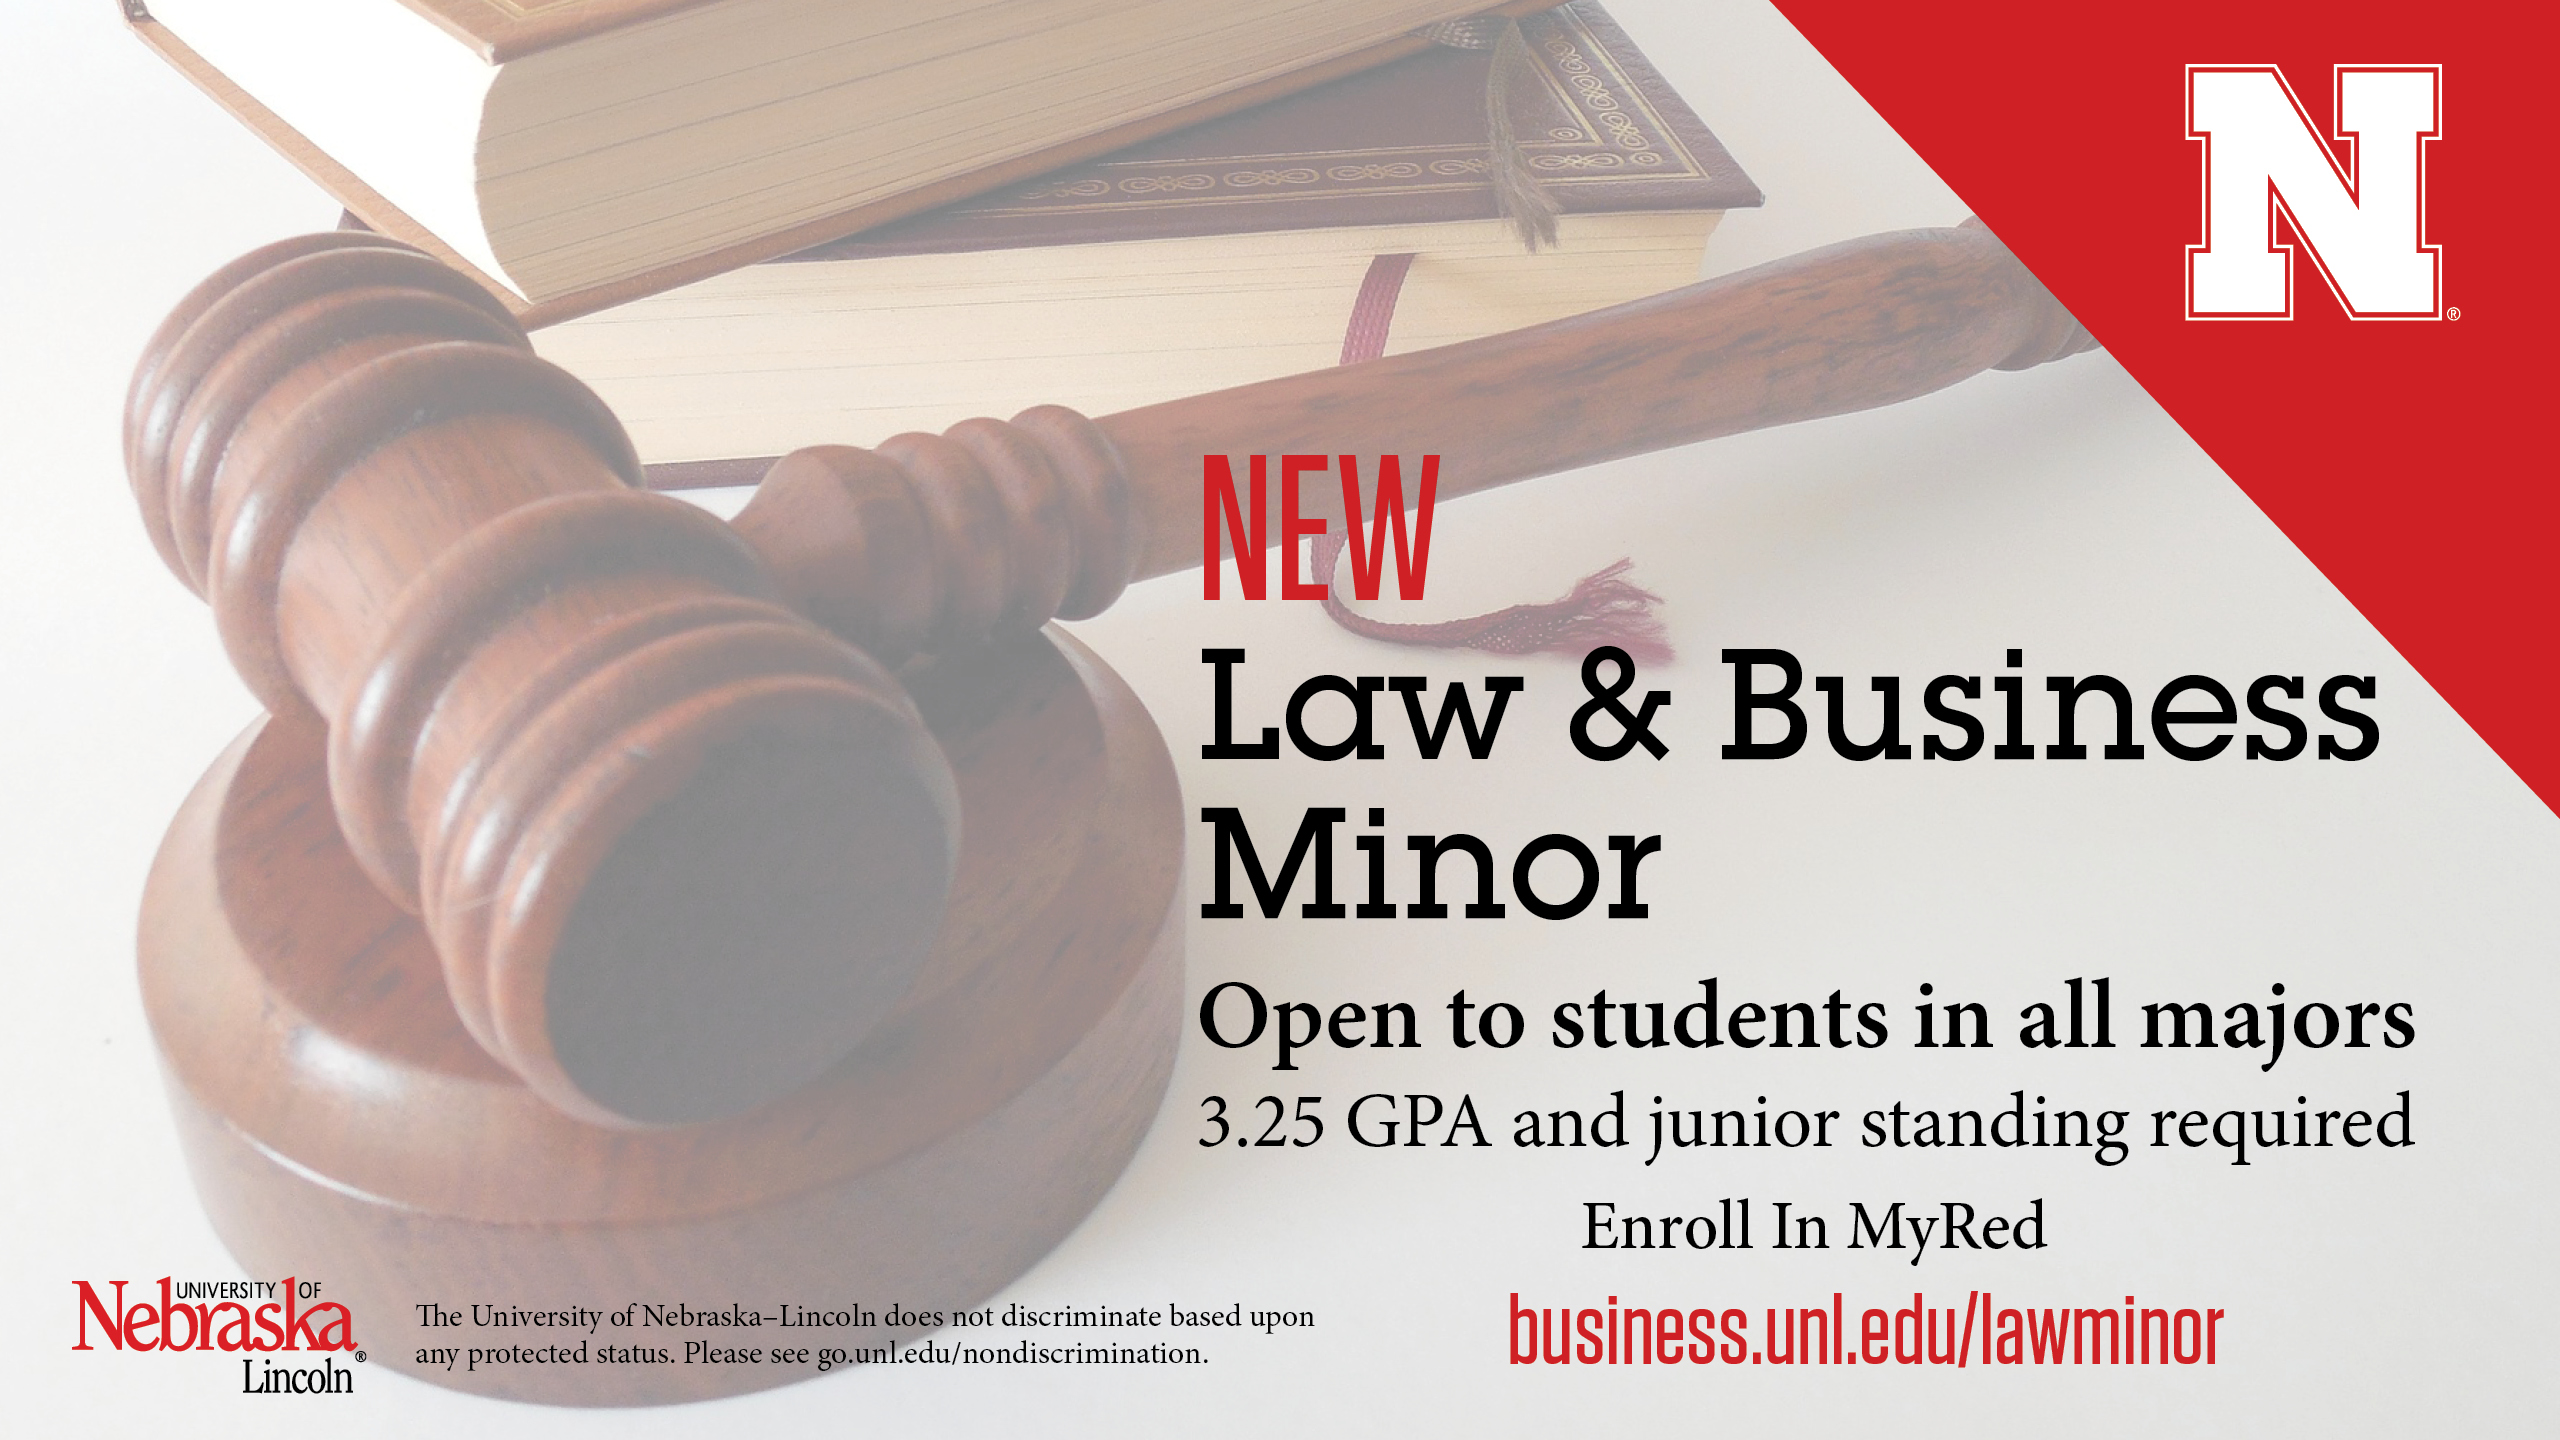 Learn More About the Law & Business Minor.